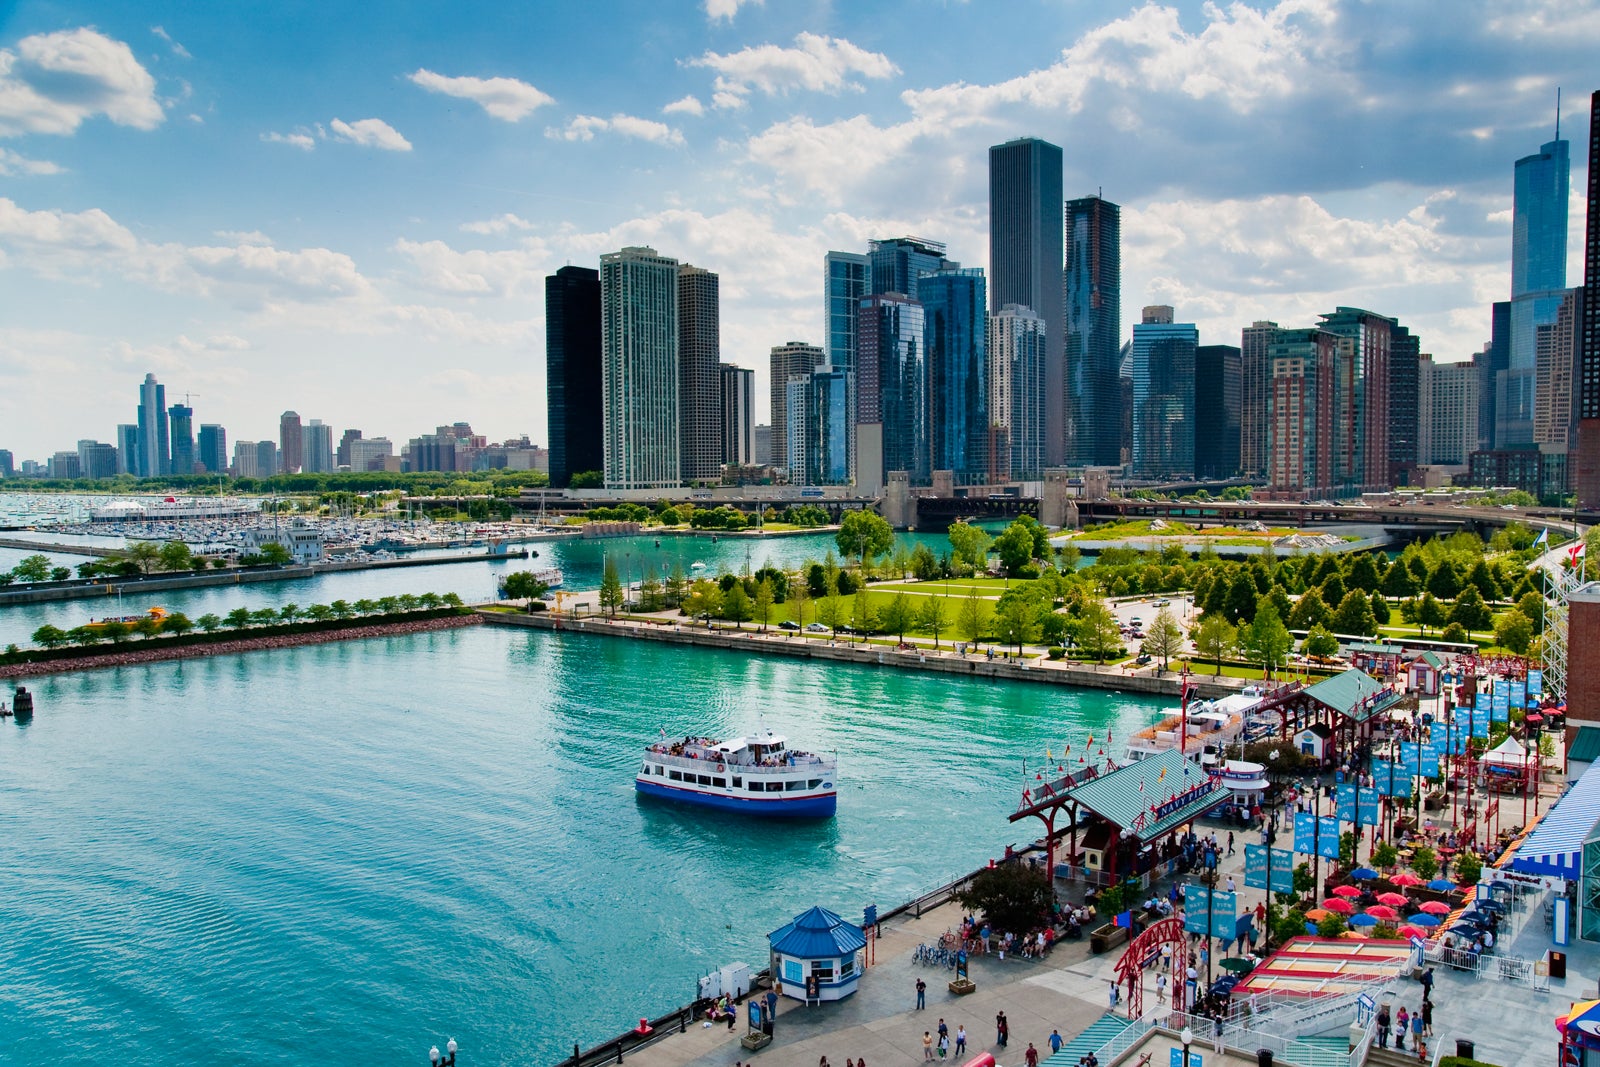 Chicago's navy pier and skyline